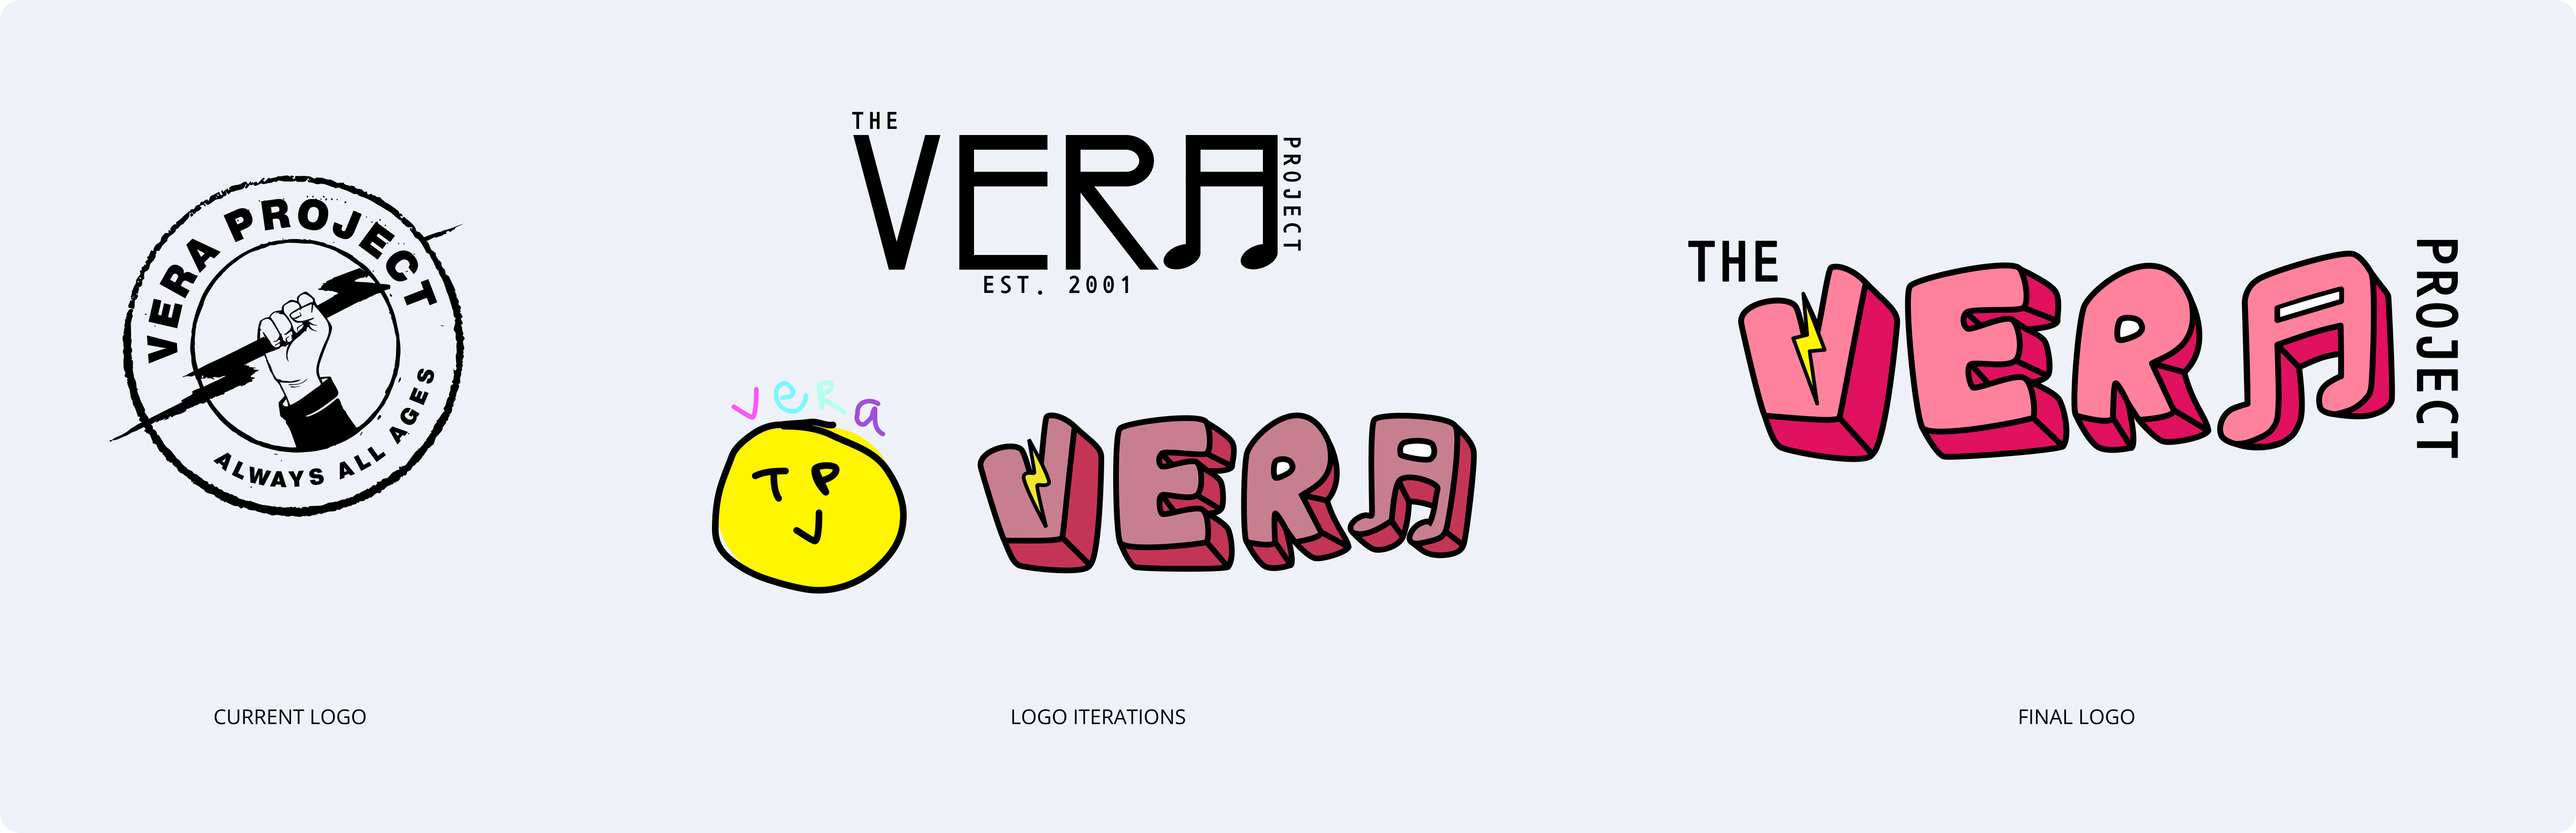 The Vera Project's Current Logo vs Logo iterations